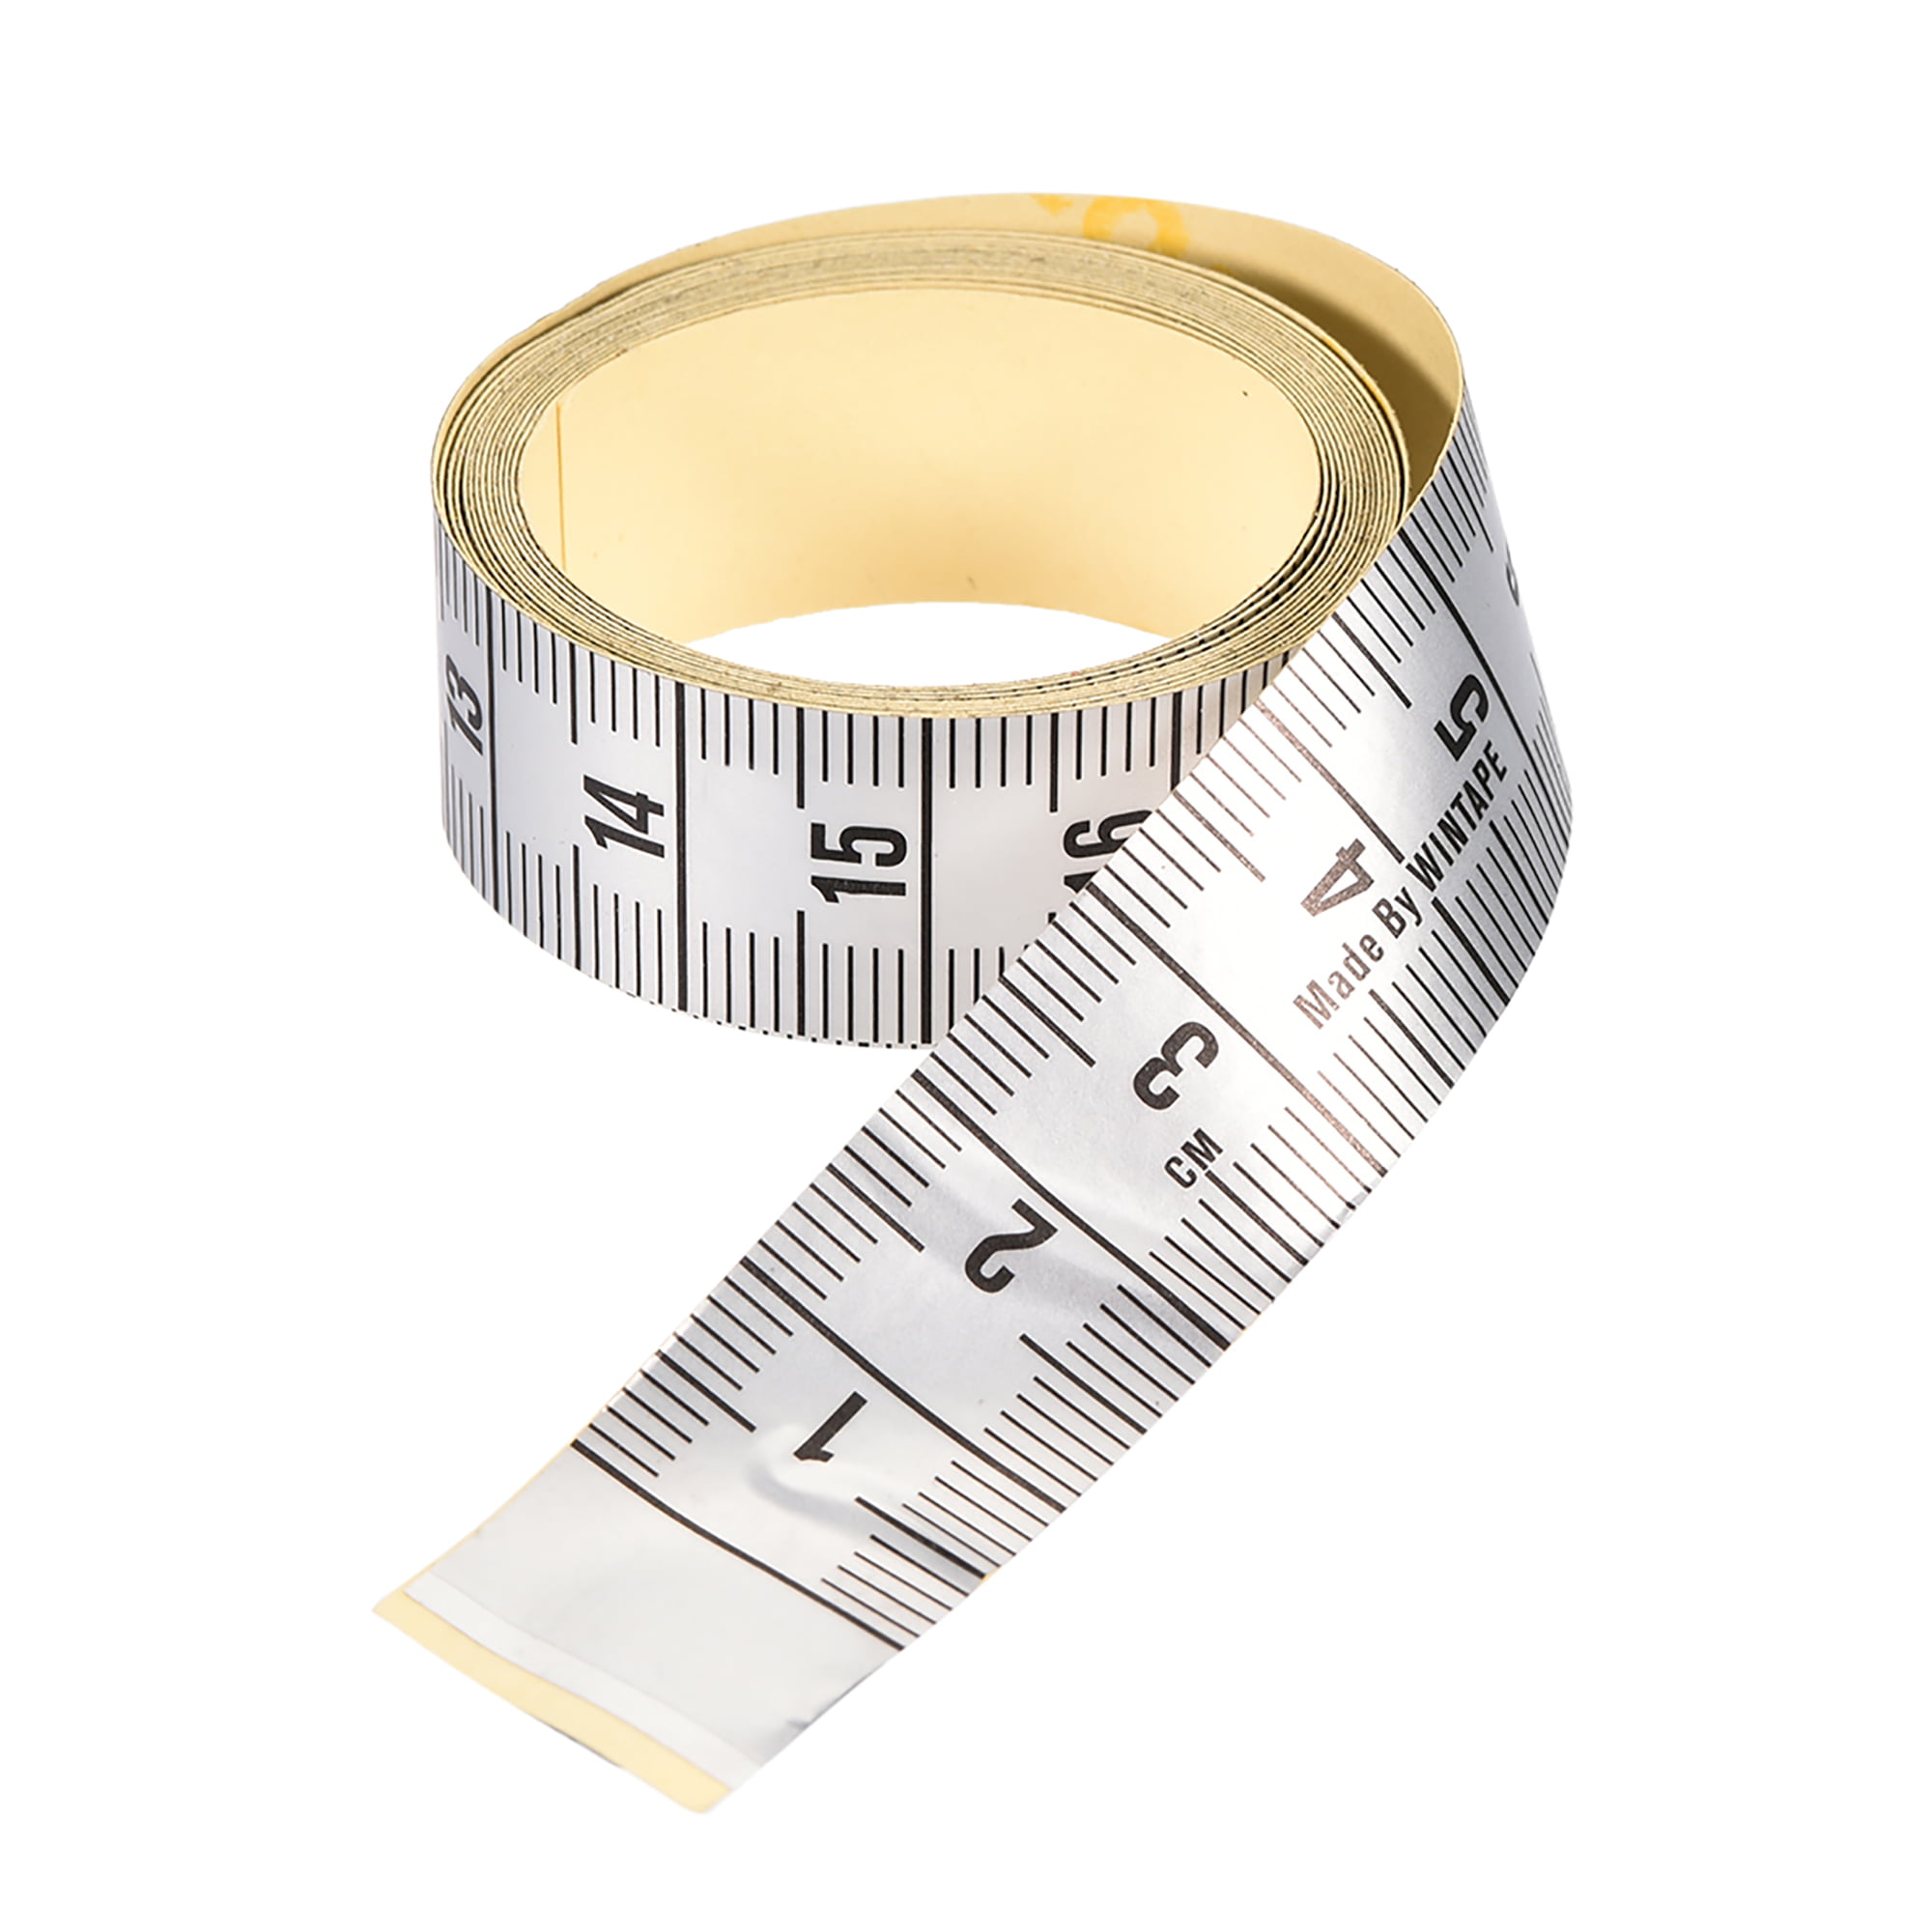 adhesive-backed-tape-measure-150cm-metric-system-measuring-tools-for-tailor-sewing-walmart